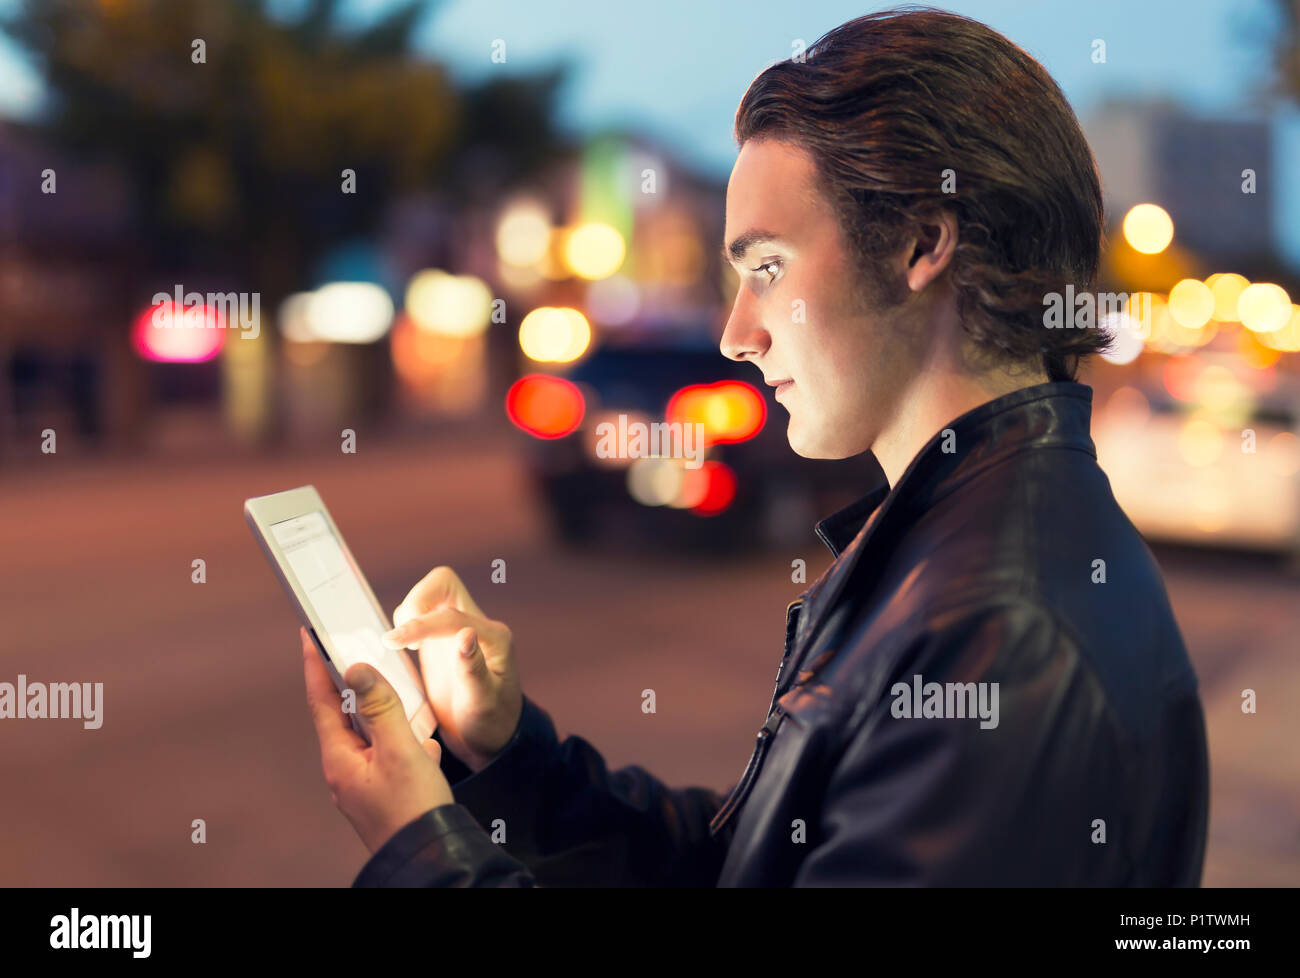 A young man uses a tablet along a street at dusk with the glowing screen illuminating his face; Edmonton, Alberta, Canada Stock Photo